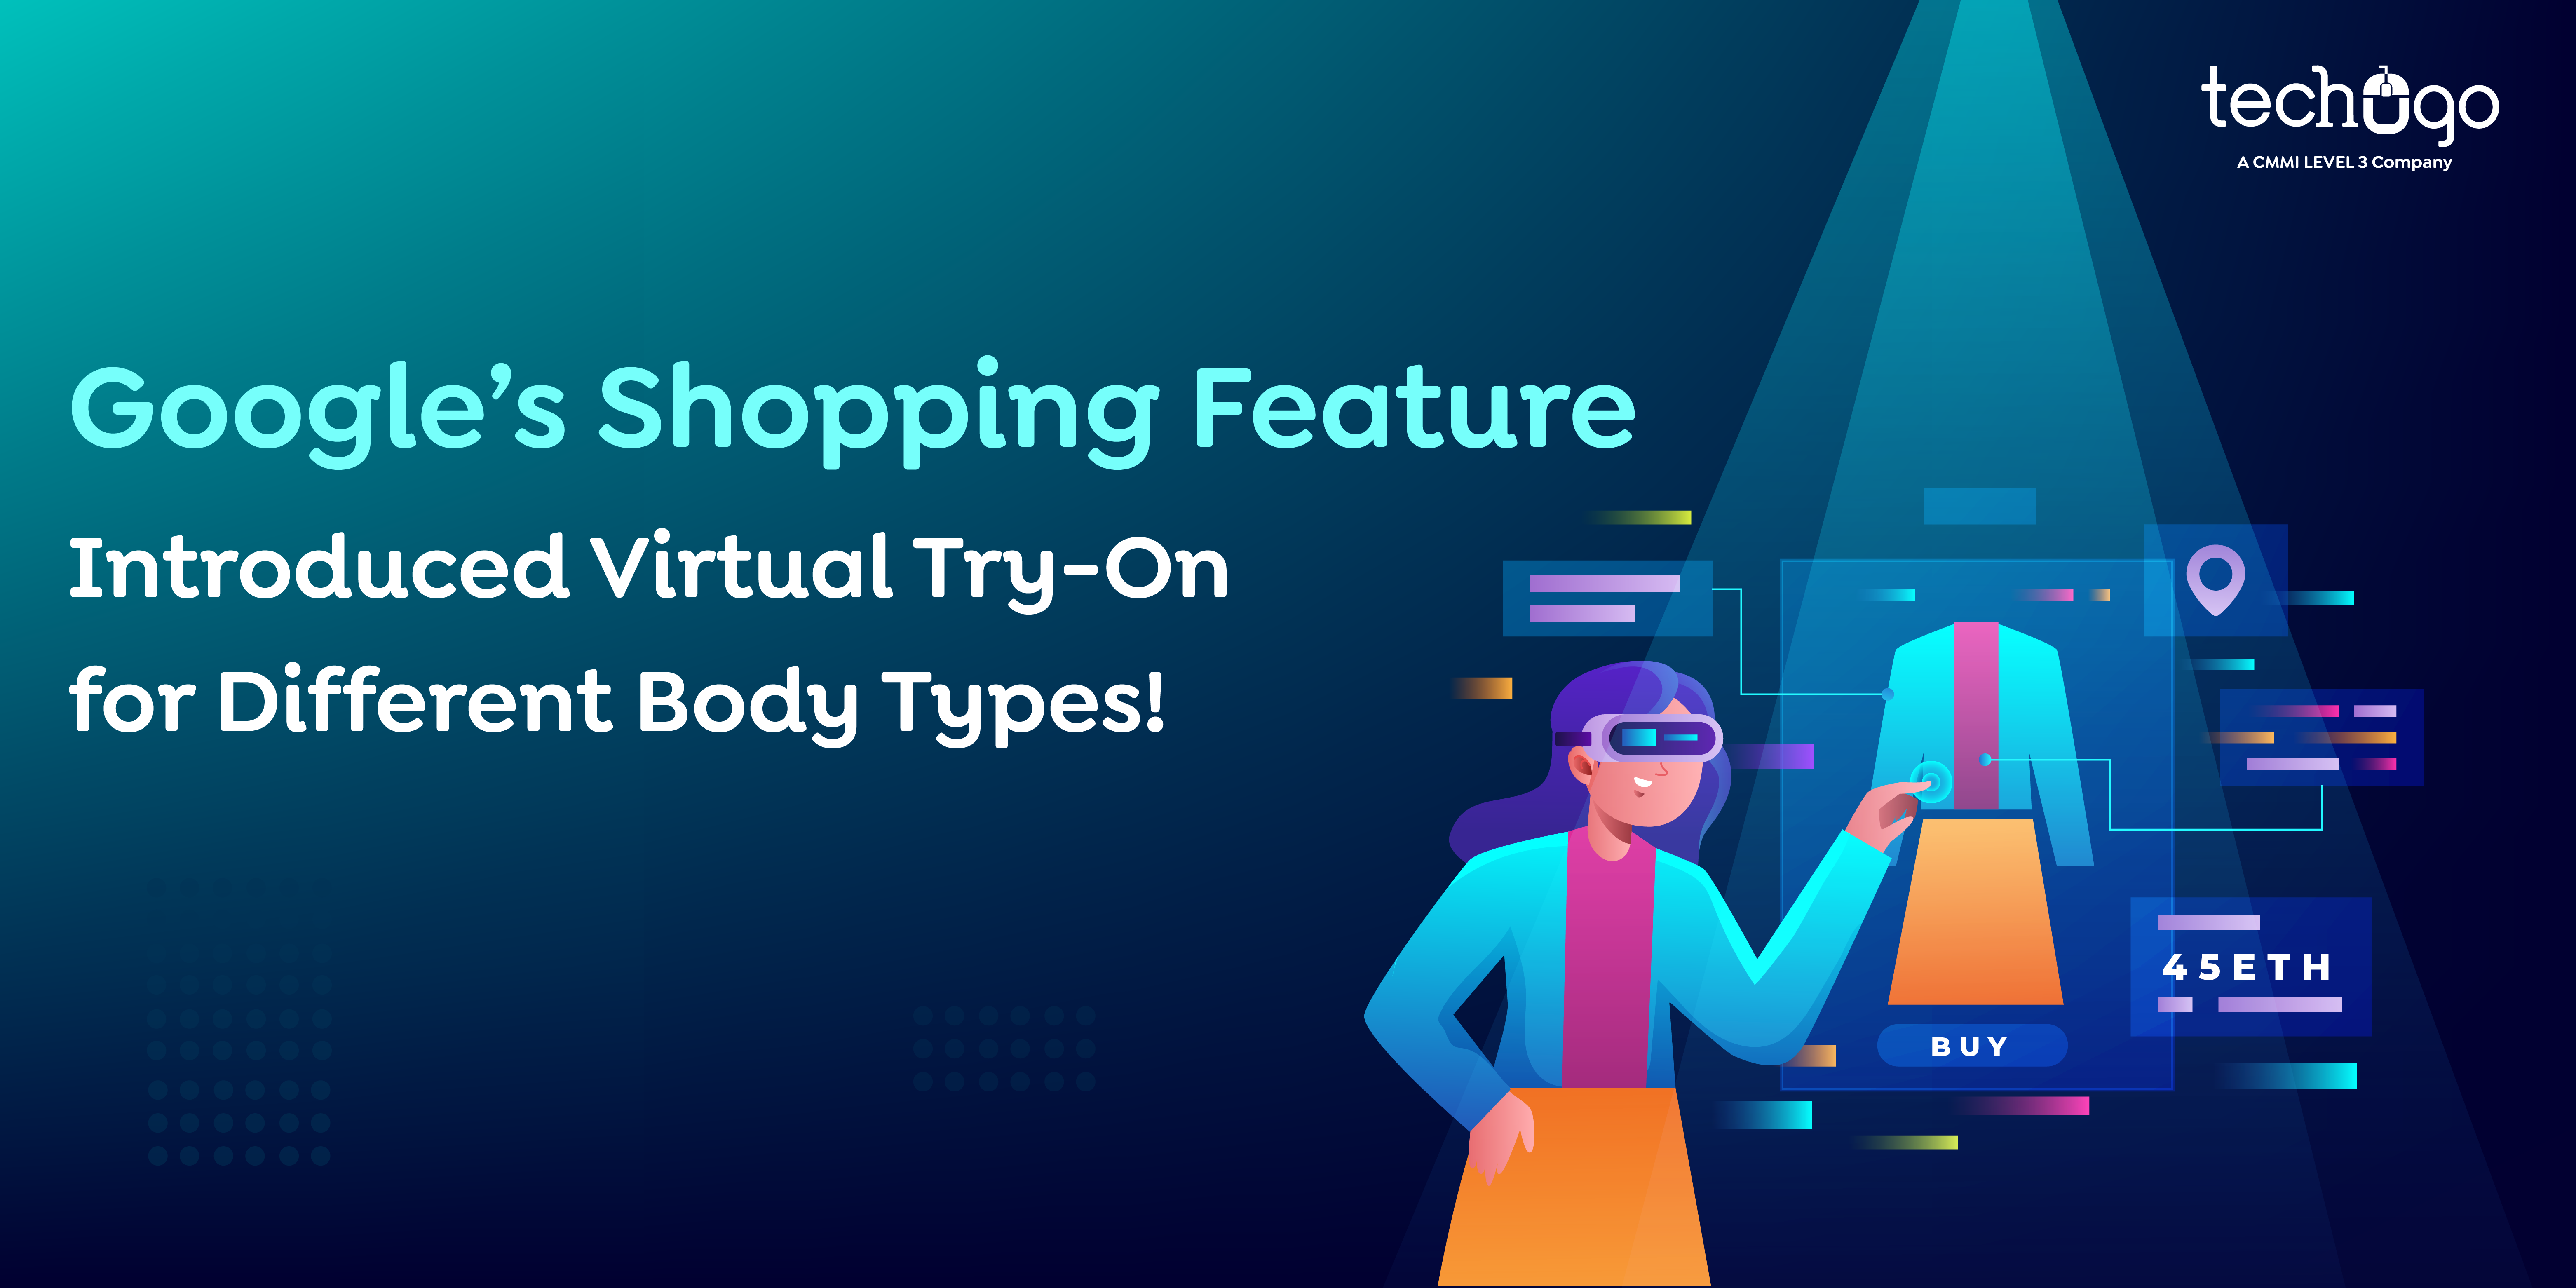 Google’s Shopping Feature Introduced Virtual Try-On for Different Body Types!